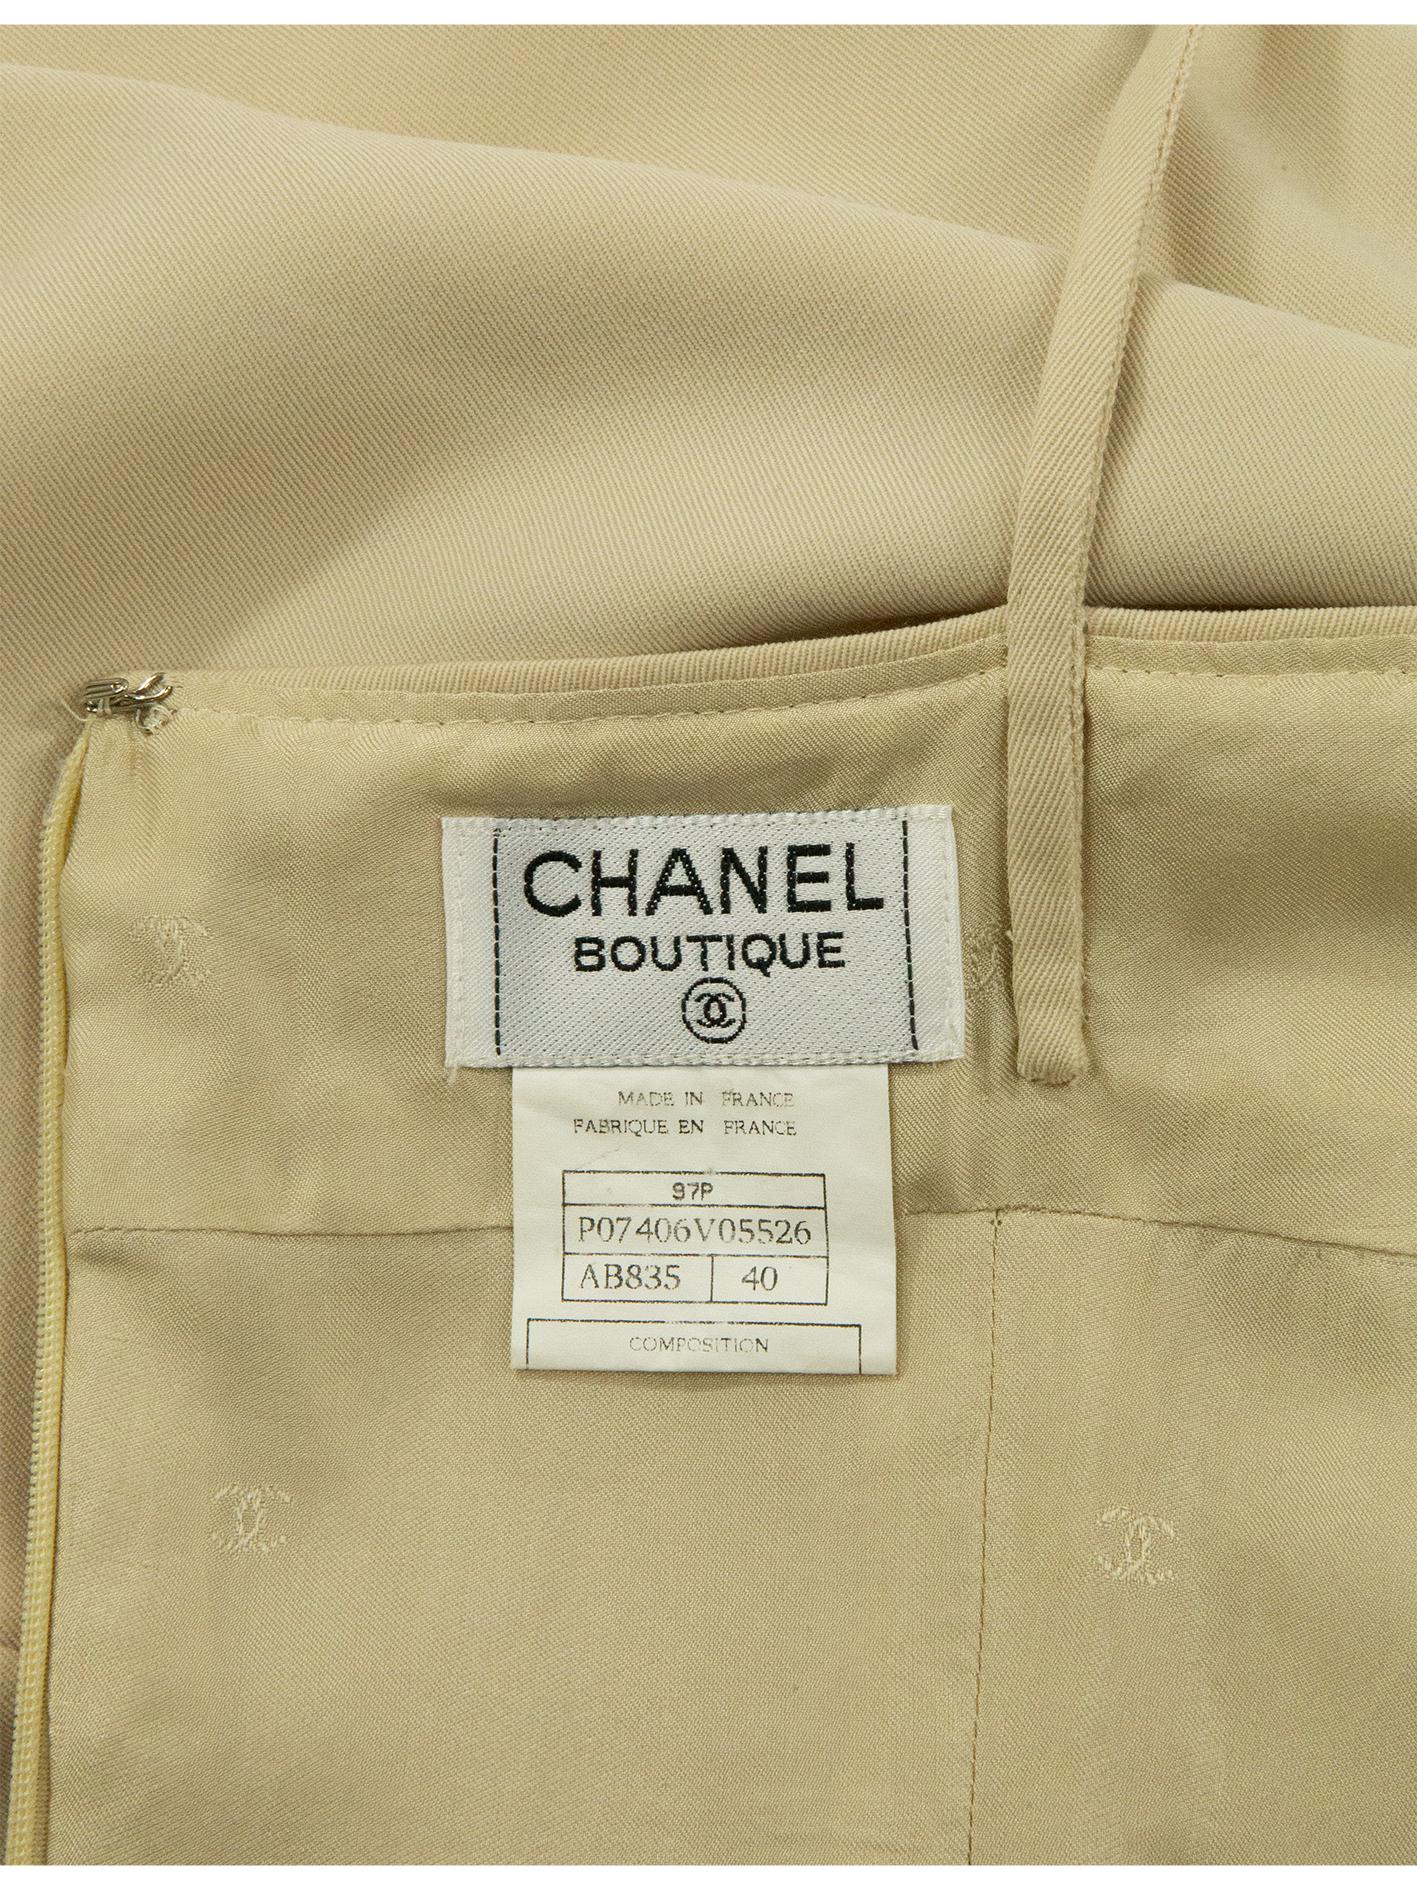 Chanel Spring 1997 Cream Playsuit In Good Condition For Sale In London, GB